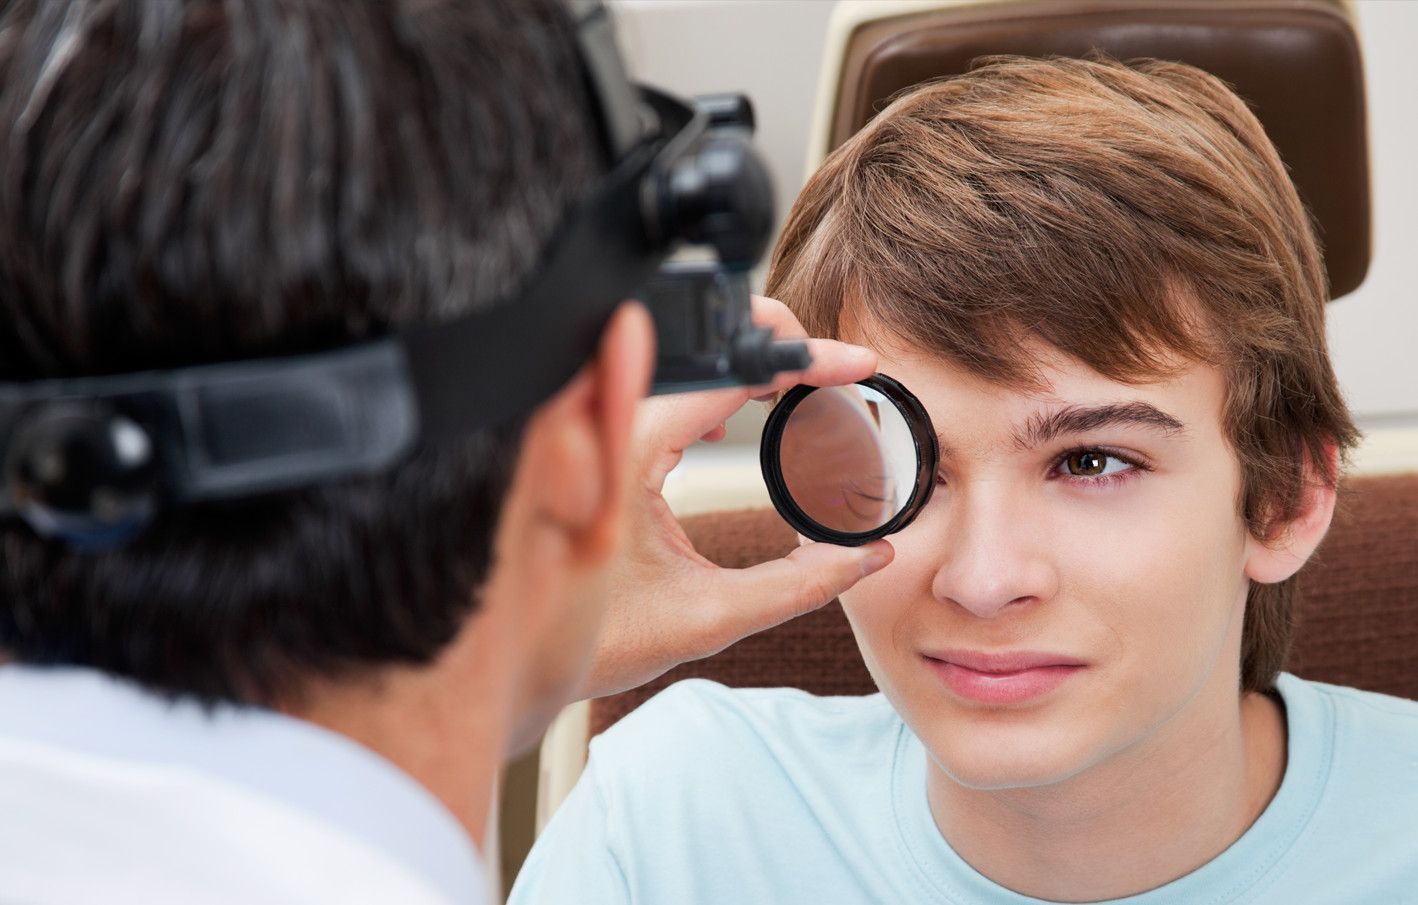 Young man getting his eyes checked at the eye doctor's office